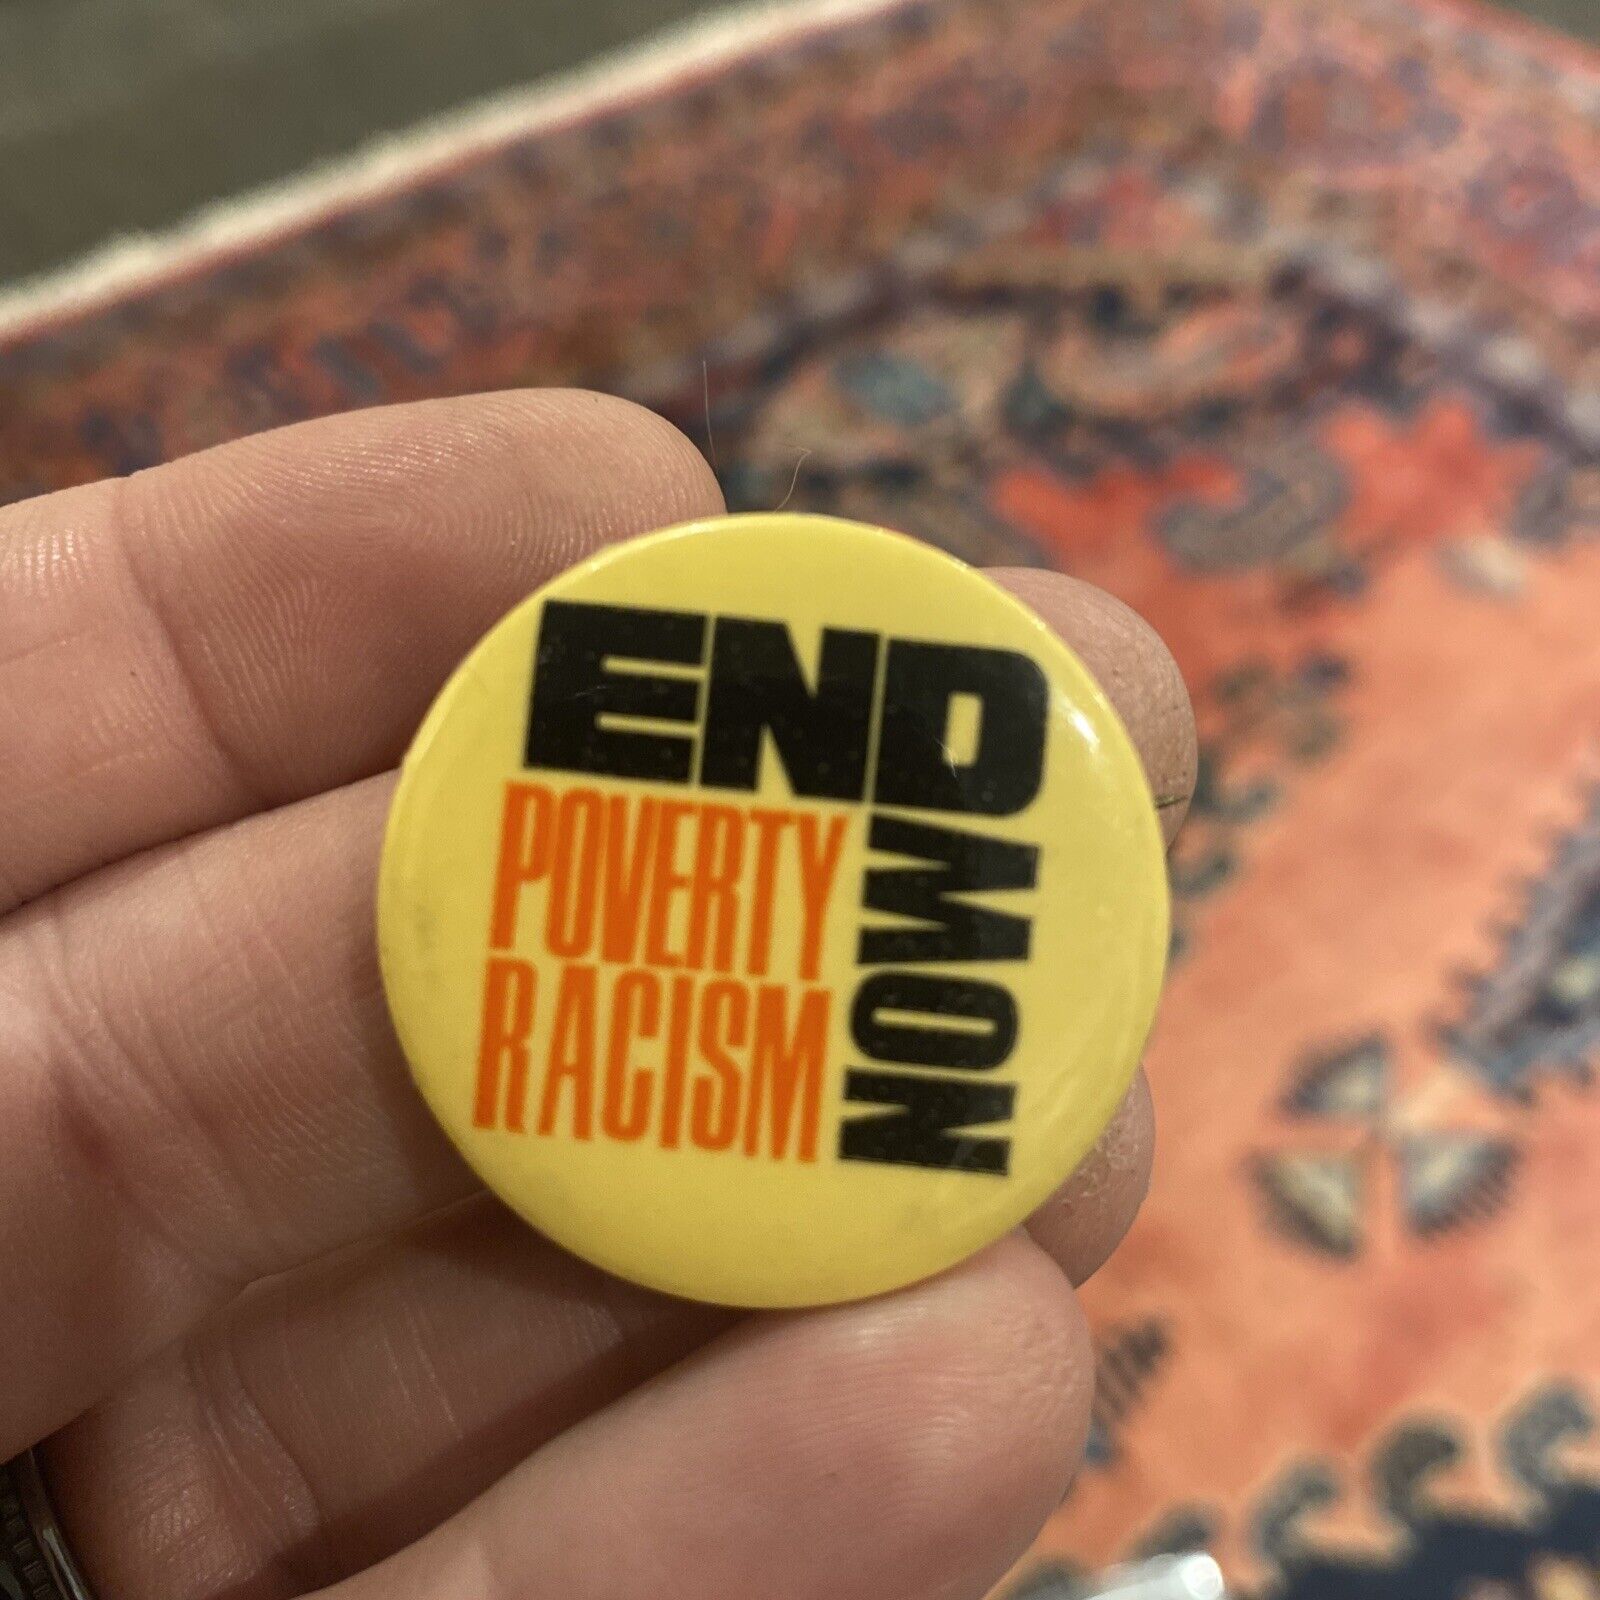 End Poverty Racism Now pinback button 